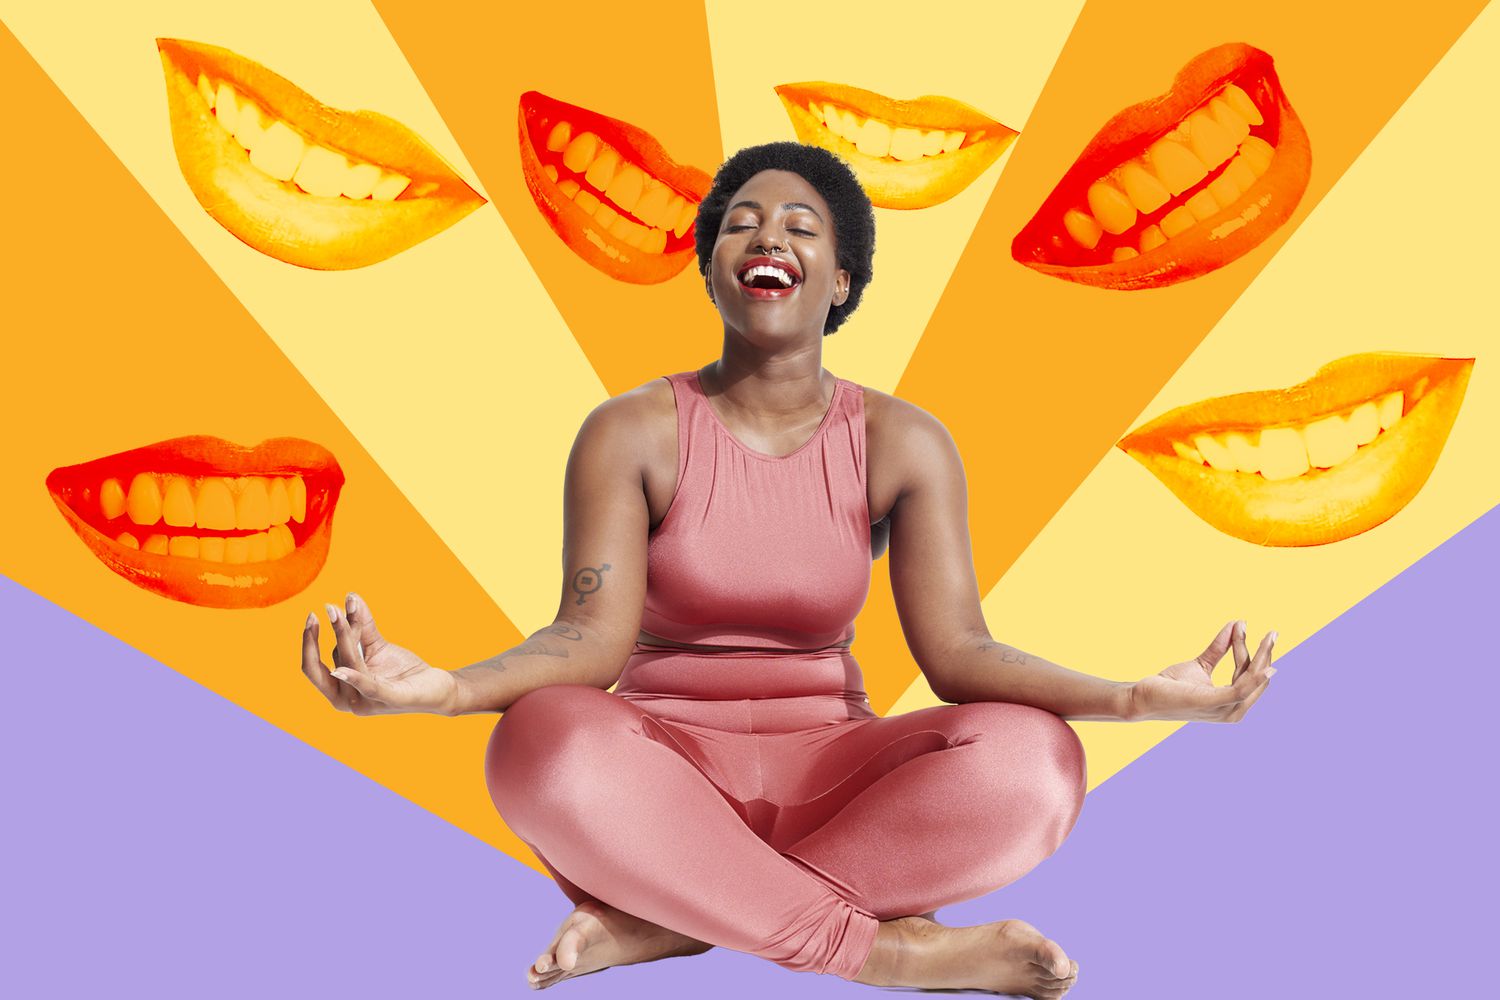 Laughing Yoga: What Is It and Does It Work?